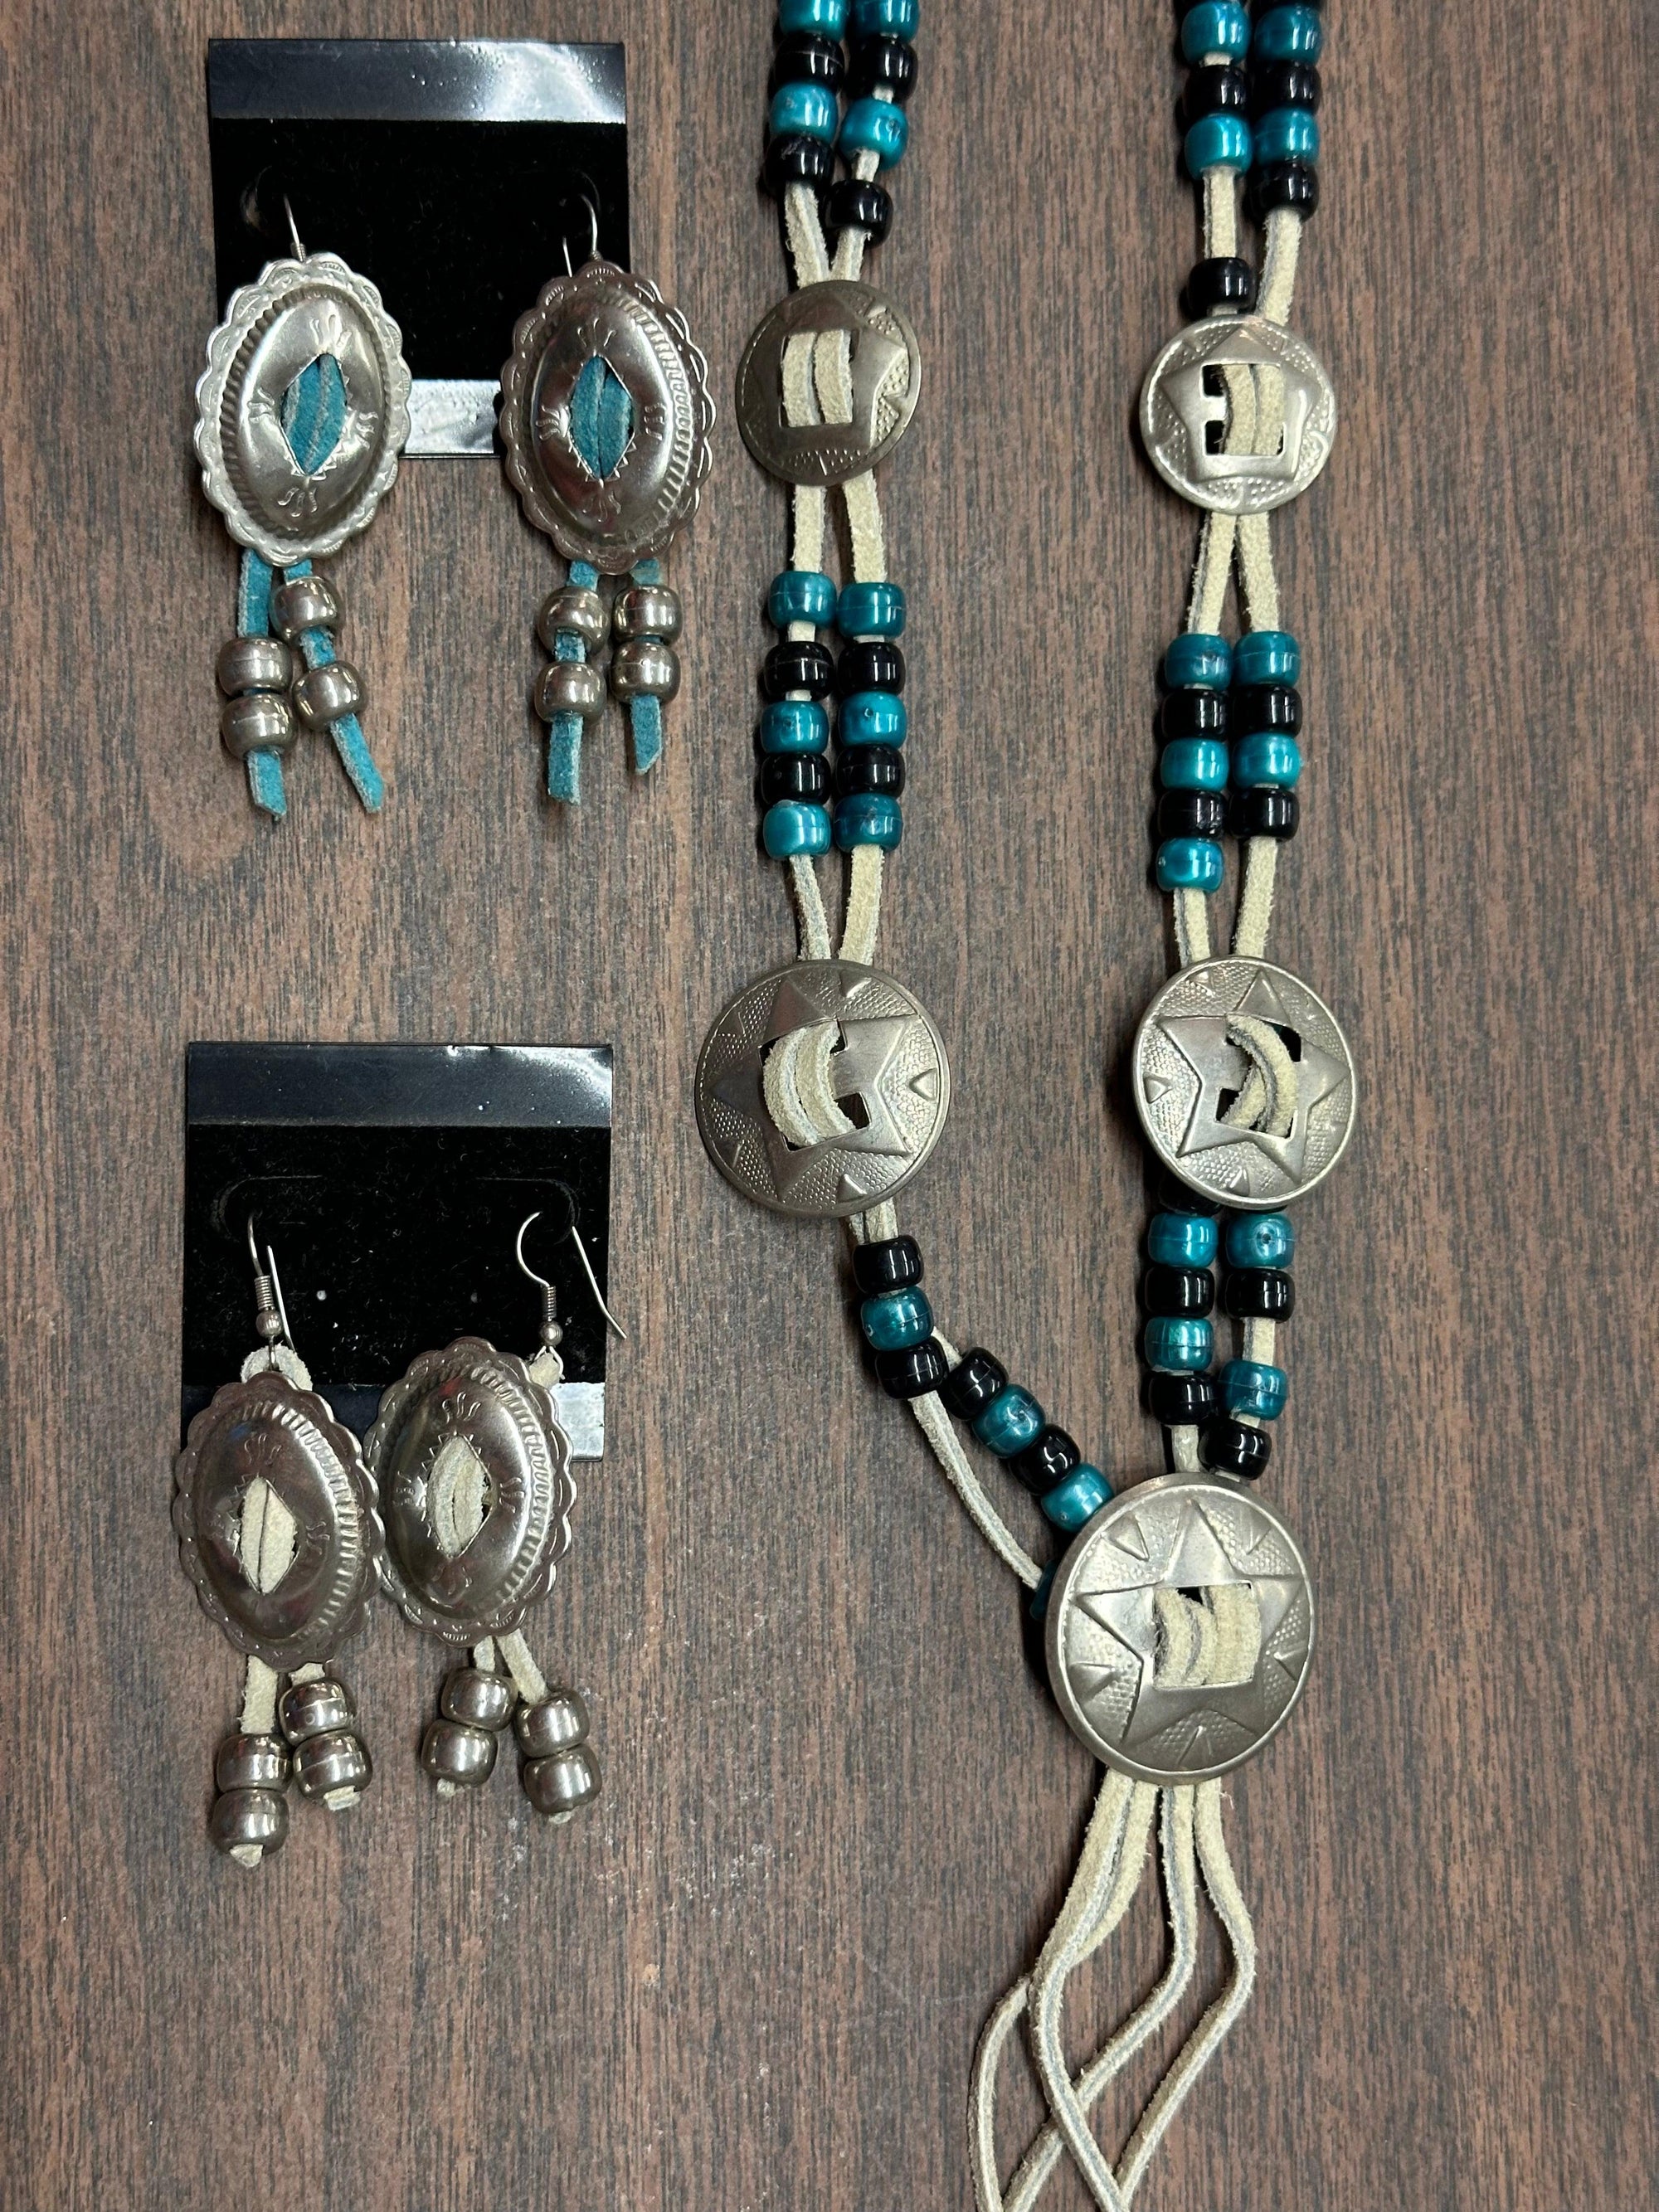 A matching set of Square Up Fashions Concho Necklace and earrings with turquoise beads.